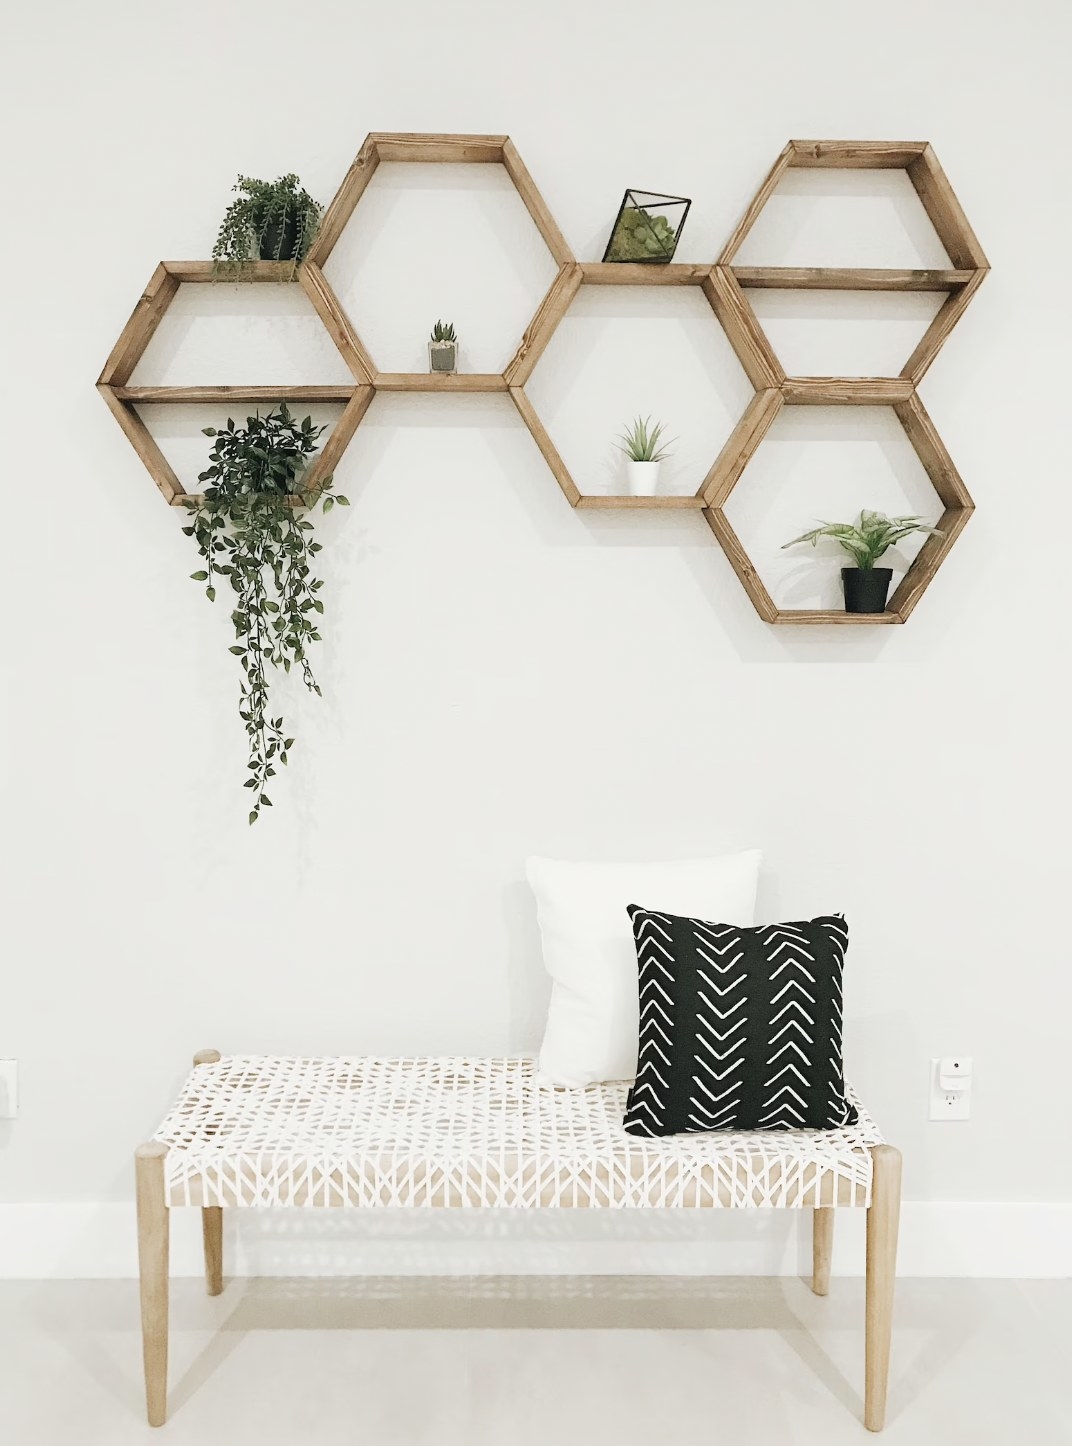 five wooden hexagon wall shelves in honeycomb shape with plants inside